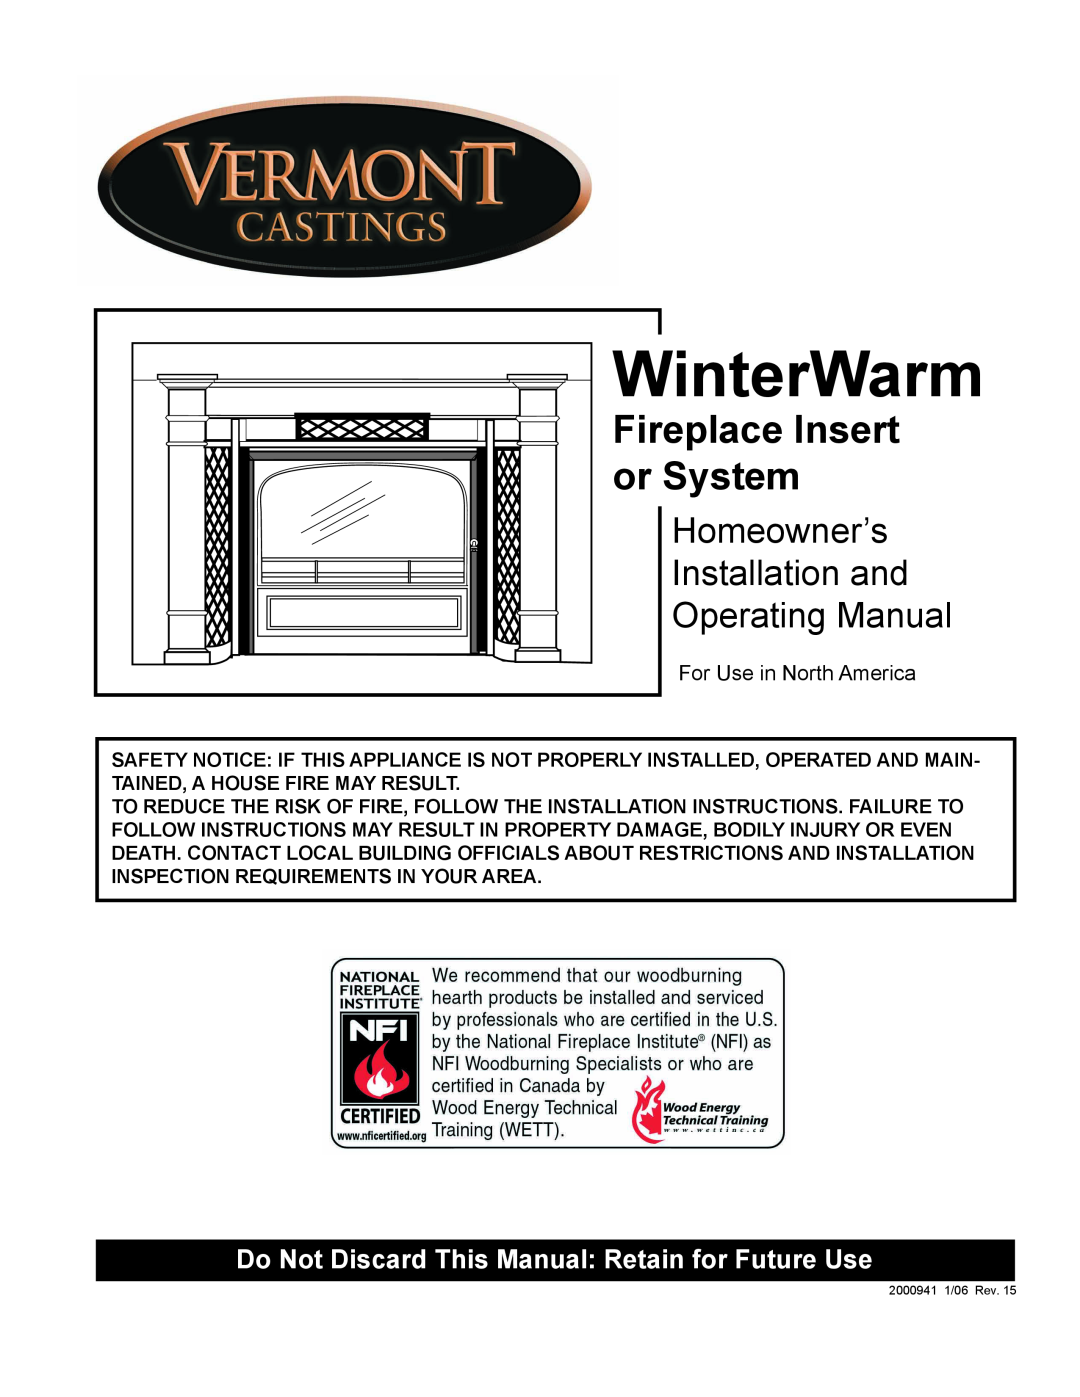 Vermont Casting WinterWarm Fireplace Insert or System installation instructions Homeowner’s, Installation and 